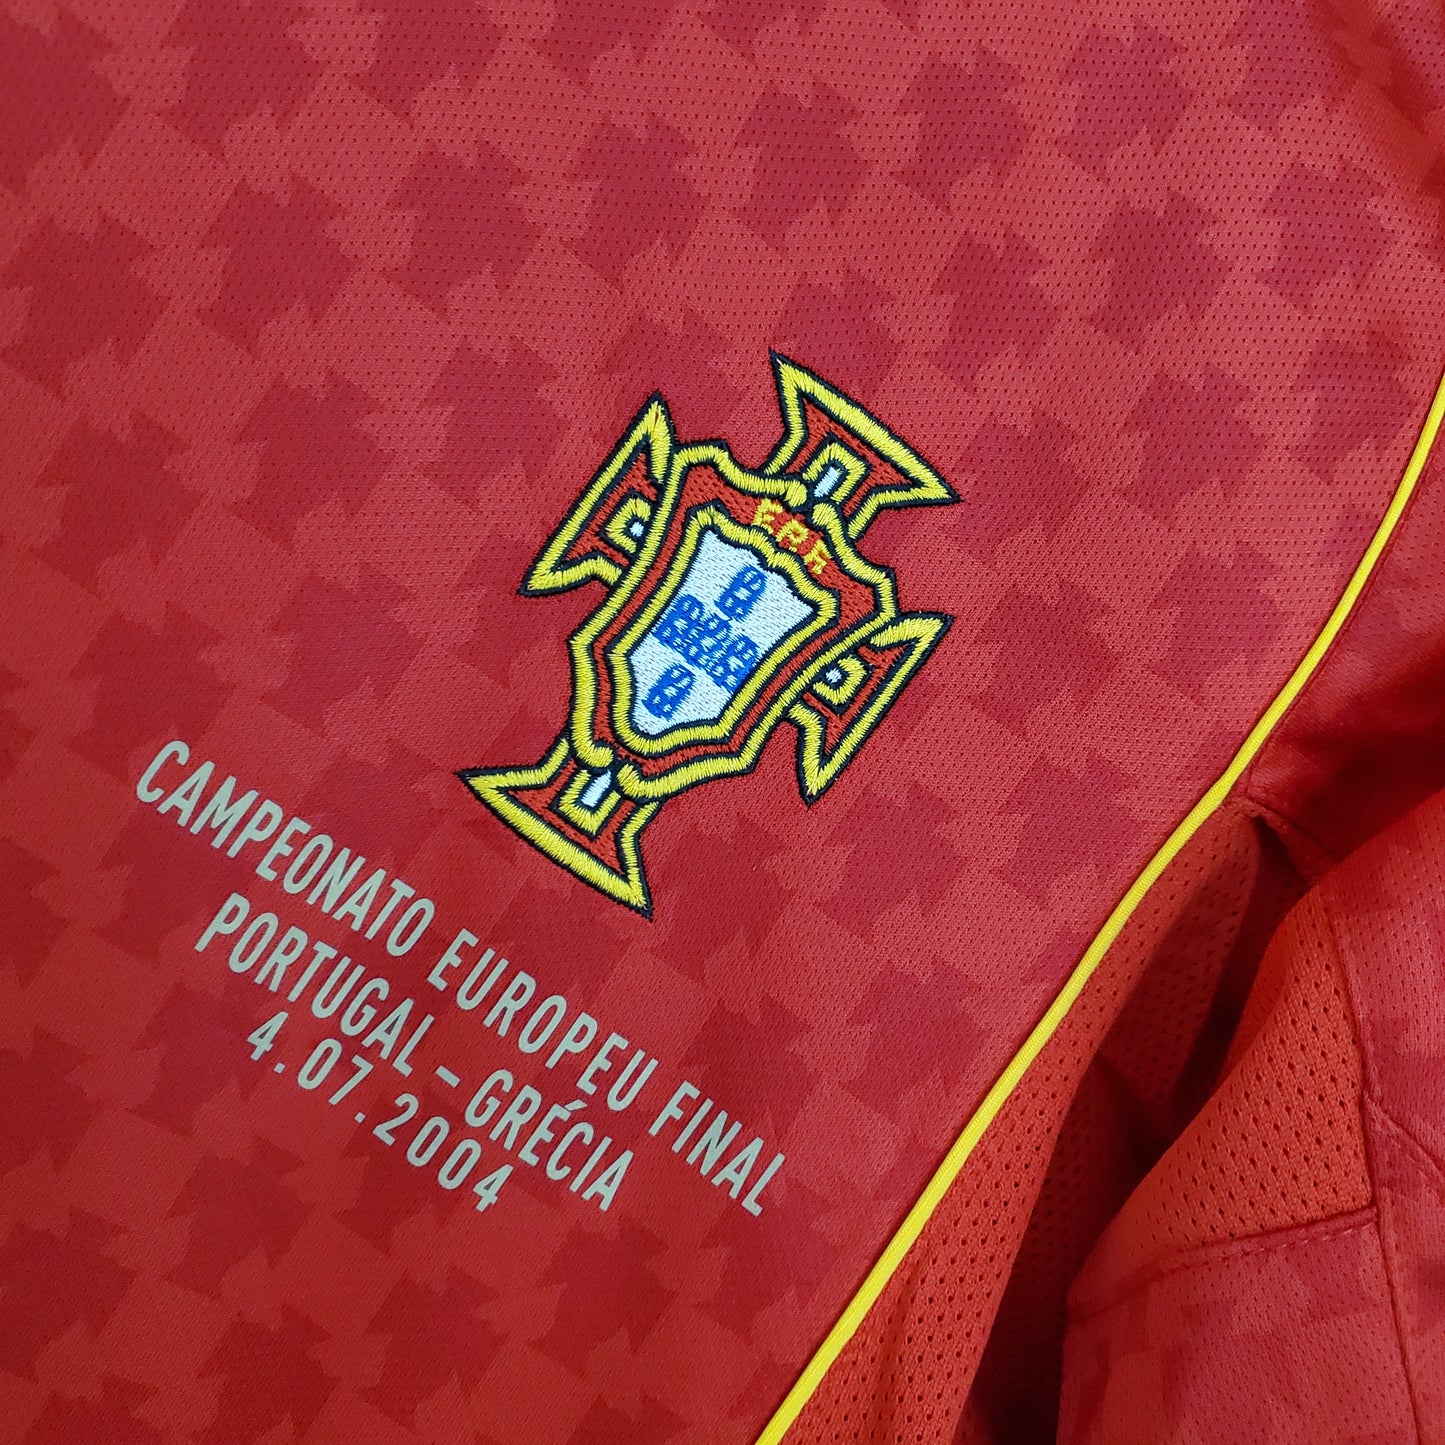 Portugal 2004 Home Jersey - Euro Finals